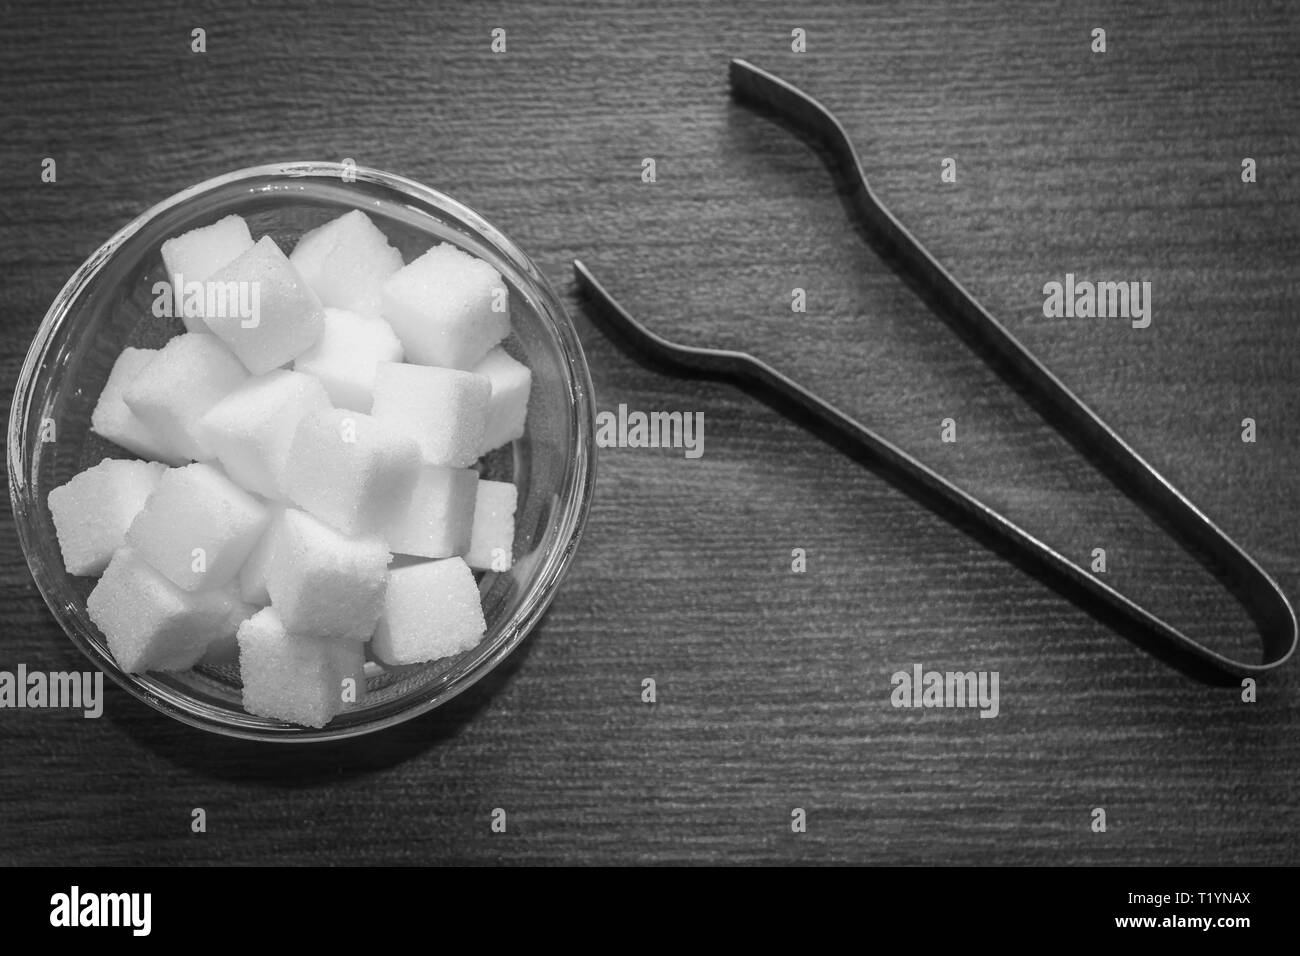 Top view of sugar cubes in a glass bowl with a pair of kitchen tongs foreceps kept on wooden floor. Contrasty black and white kitchen setup. Stock Photo